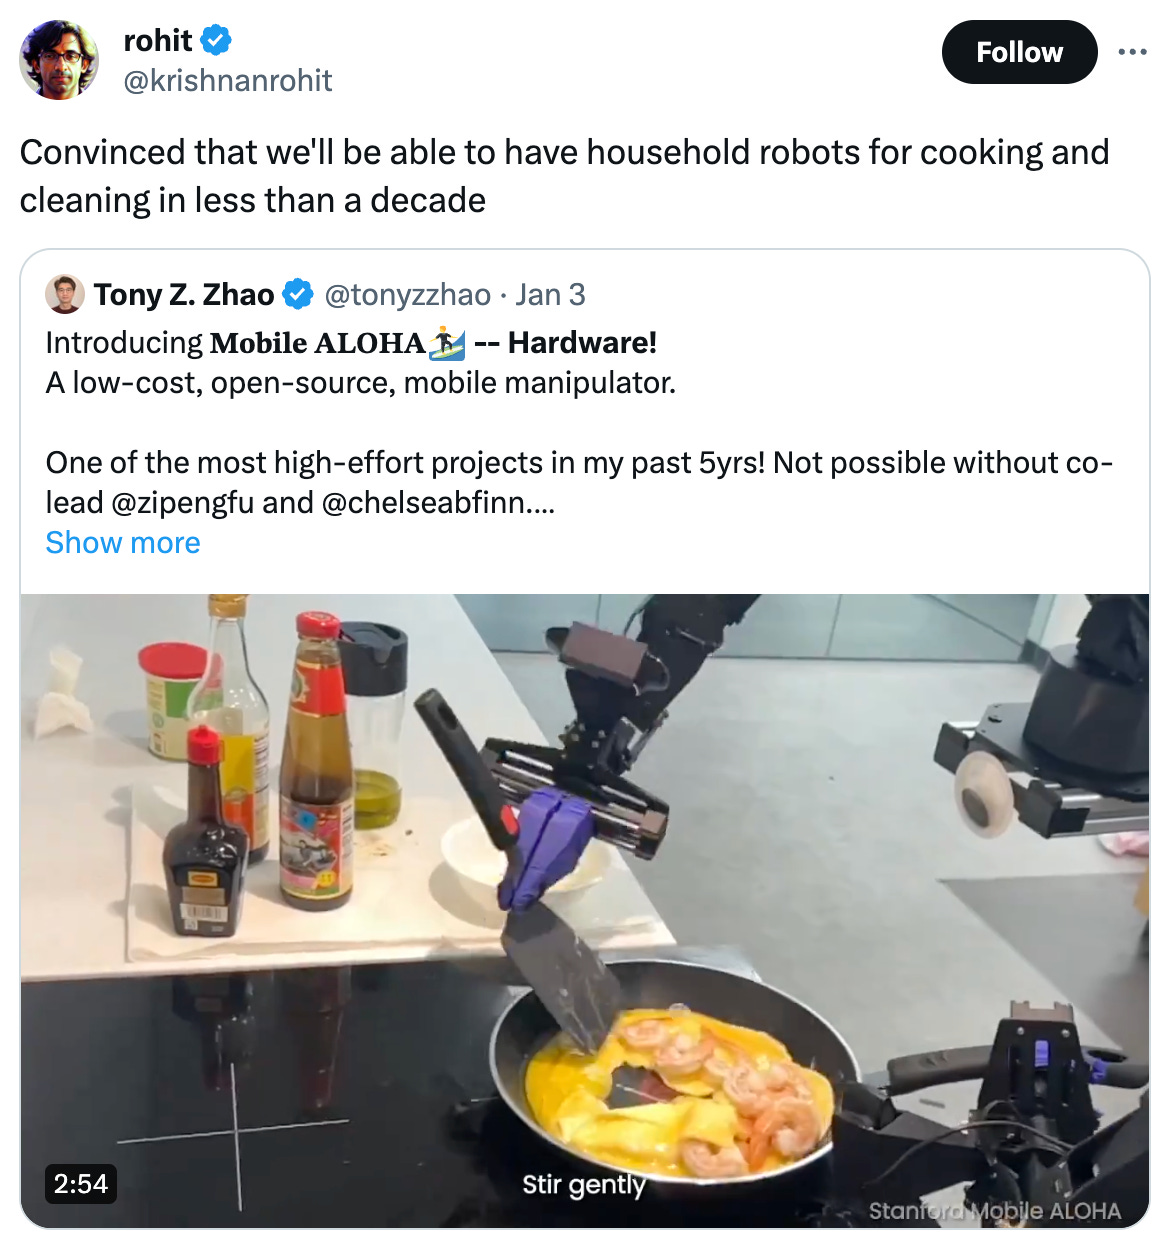  See new posts Conversation rohit @krishnanrohit Convinced that we'll be able to have household robots for cooking and cleaning in less than a decade Quote Tony Z. Zhao @tonyzzhao · Jan 3 Introducing 𝐌𝐨𝐛𝐢𝐥𝐞 𝐀𝐋𝐎𝐇𝐀🏄 -- Hardware! A low-cost, open-source, mobile manipulator.  One of the most high-effort projects in my past 5yrs! Not possible without co-lead @zipengfu and @chelseabfinn.  At the end, what's better than cooking yourself a meal with the 🤖🧑‍🍳 Show more